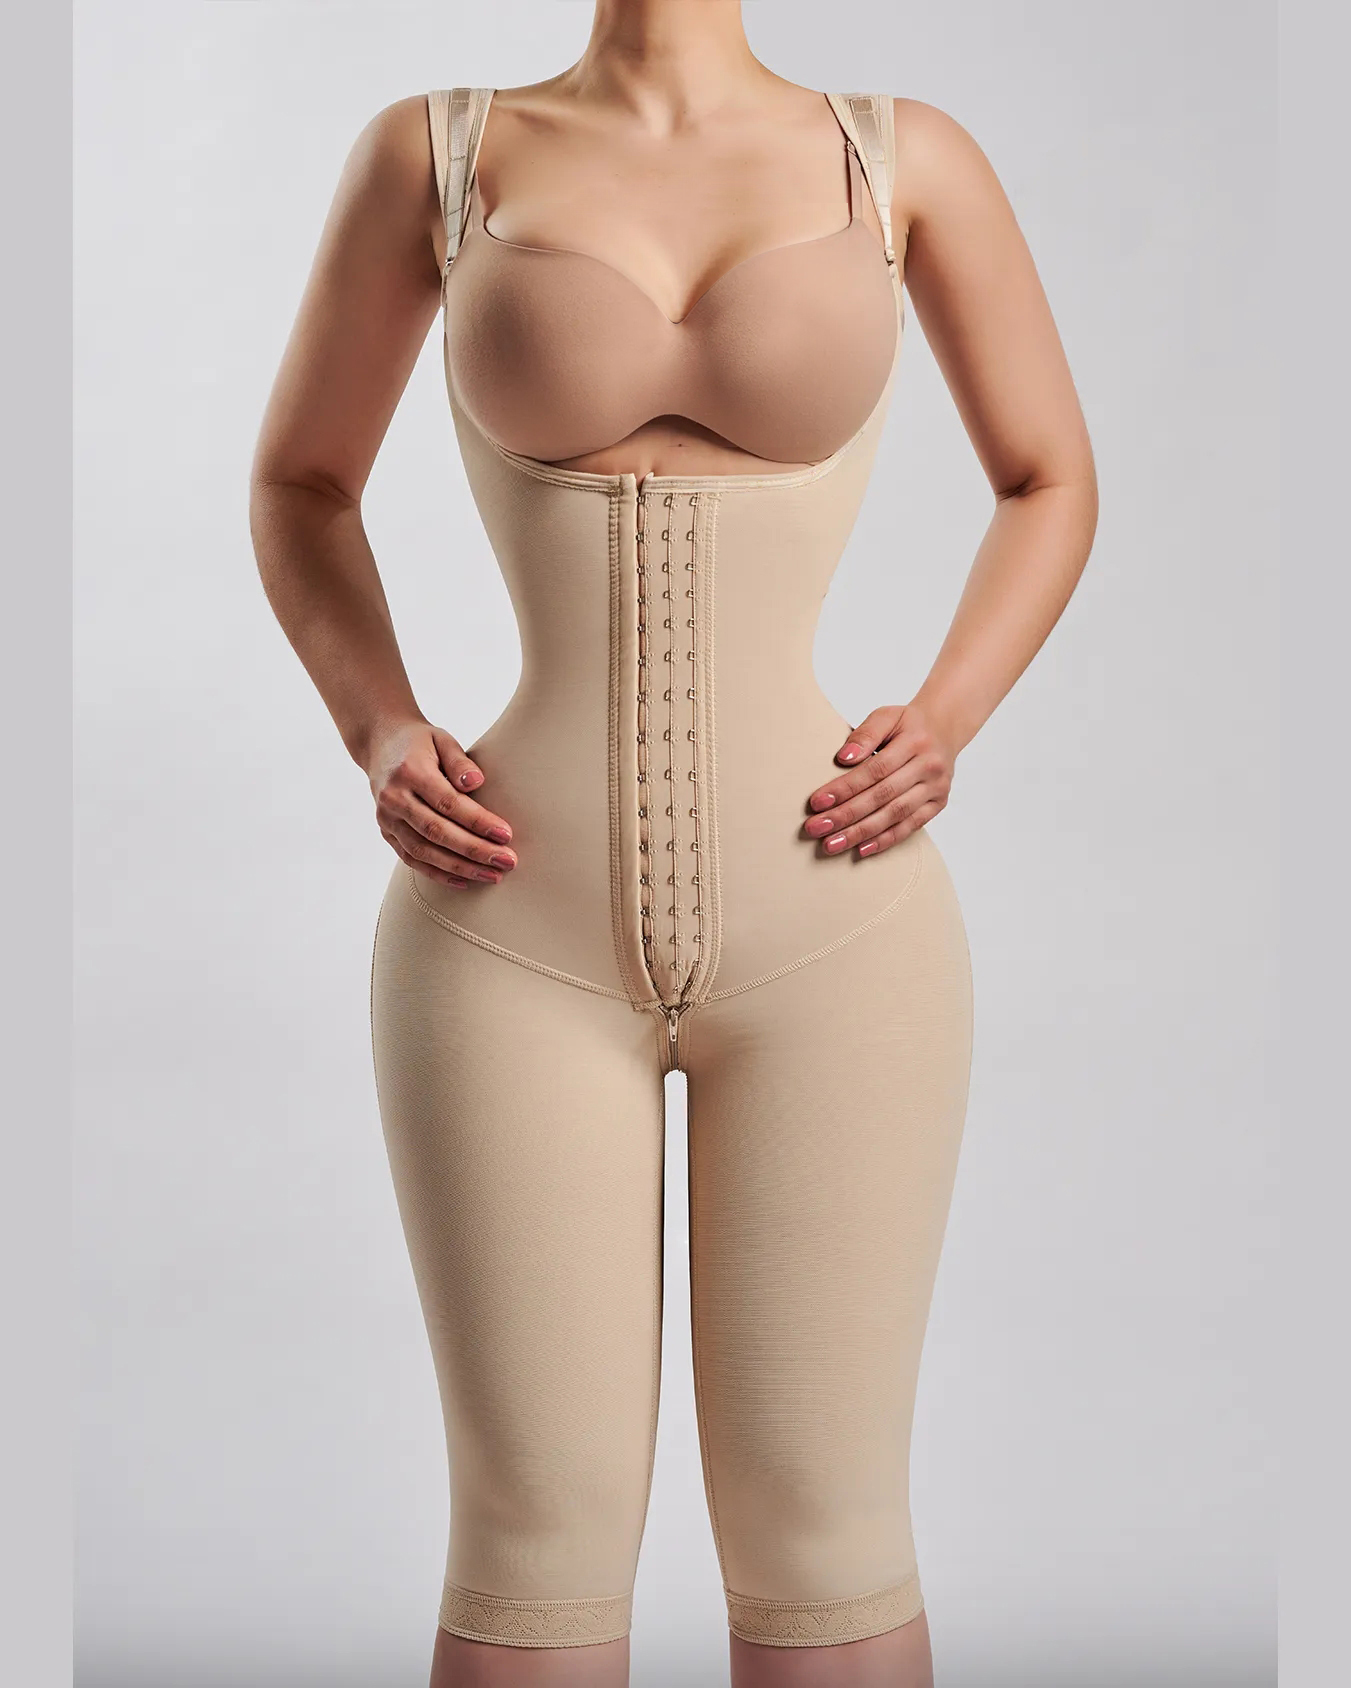  QCOTNG Body Shaper for Women Bbl Full Body Faja Postpartum Post Tummy  Tuck Compression Garment Girdles for Women Extra Firm Tummy Control Plus  Size Shapewear with Butt Lifter : Clothing, Shoes